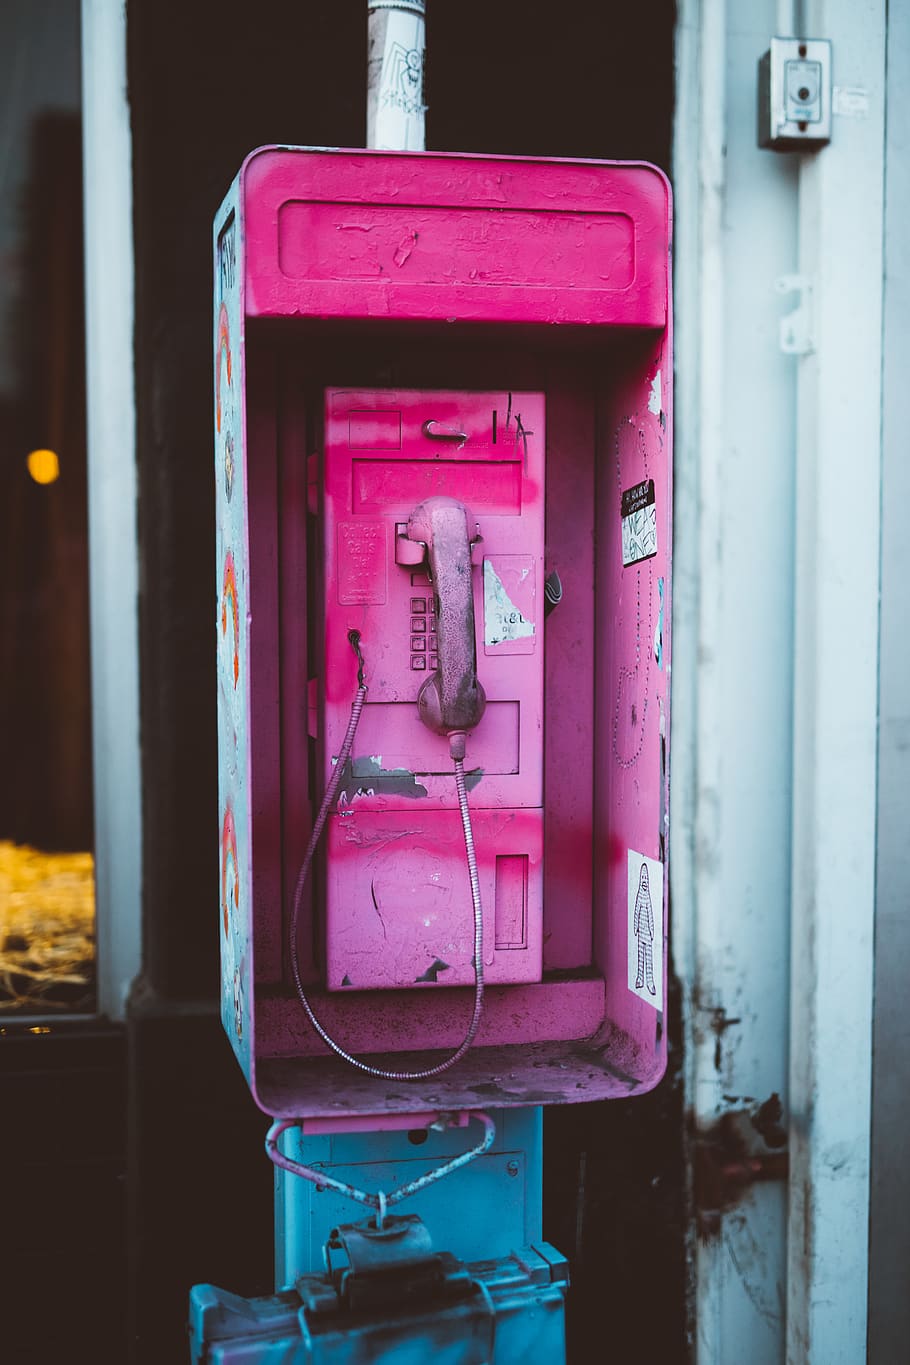 empty phone booth, letterbox, mailbox, electronics, dial telephone, HD wallpaper